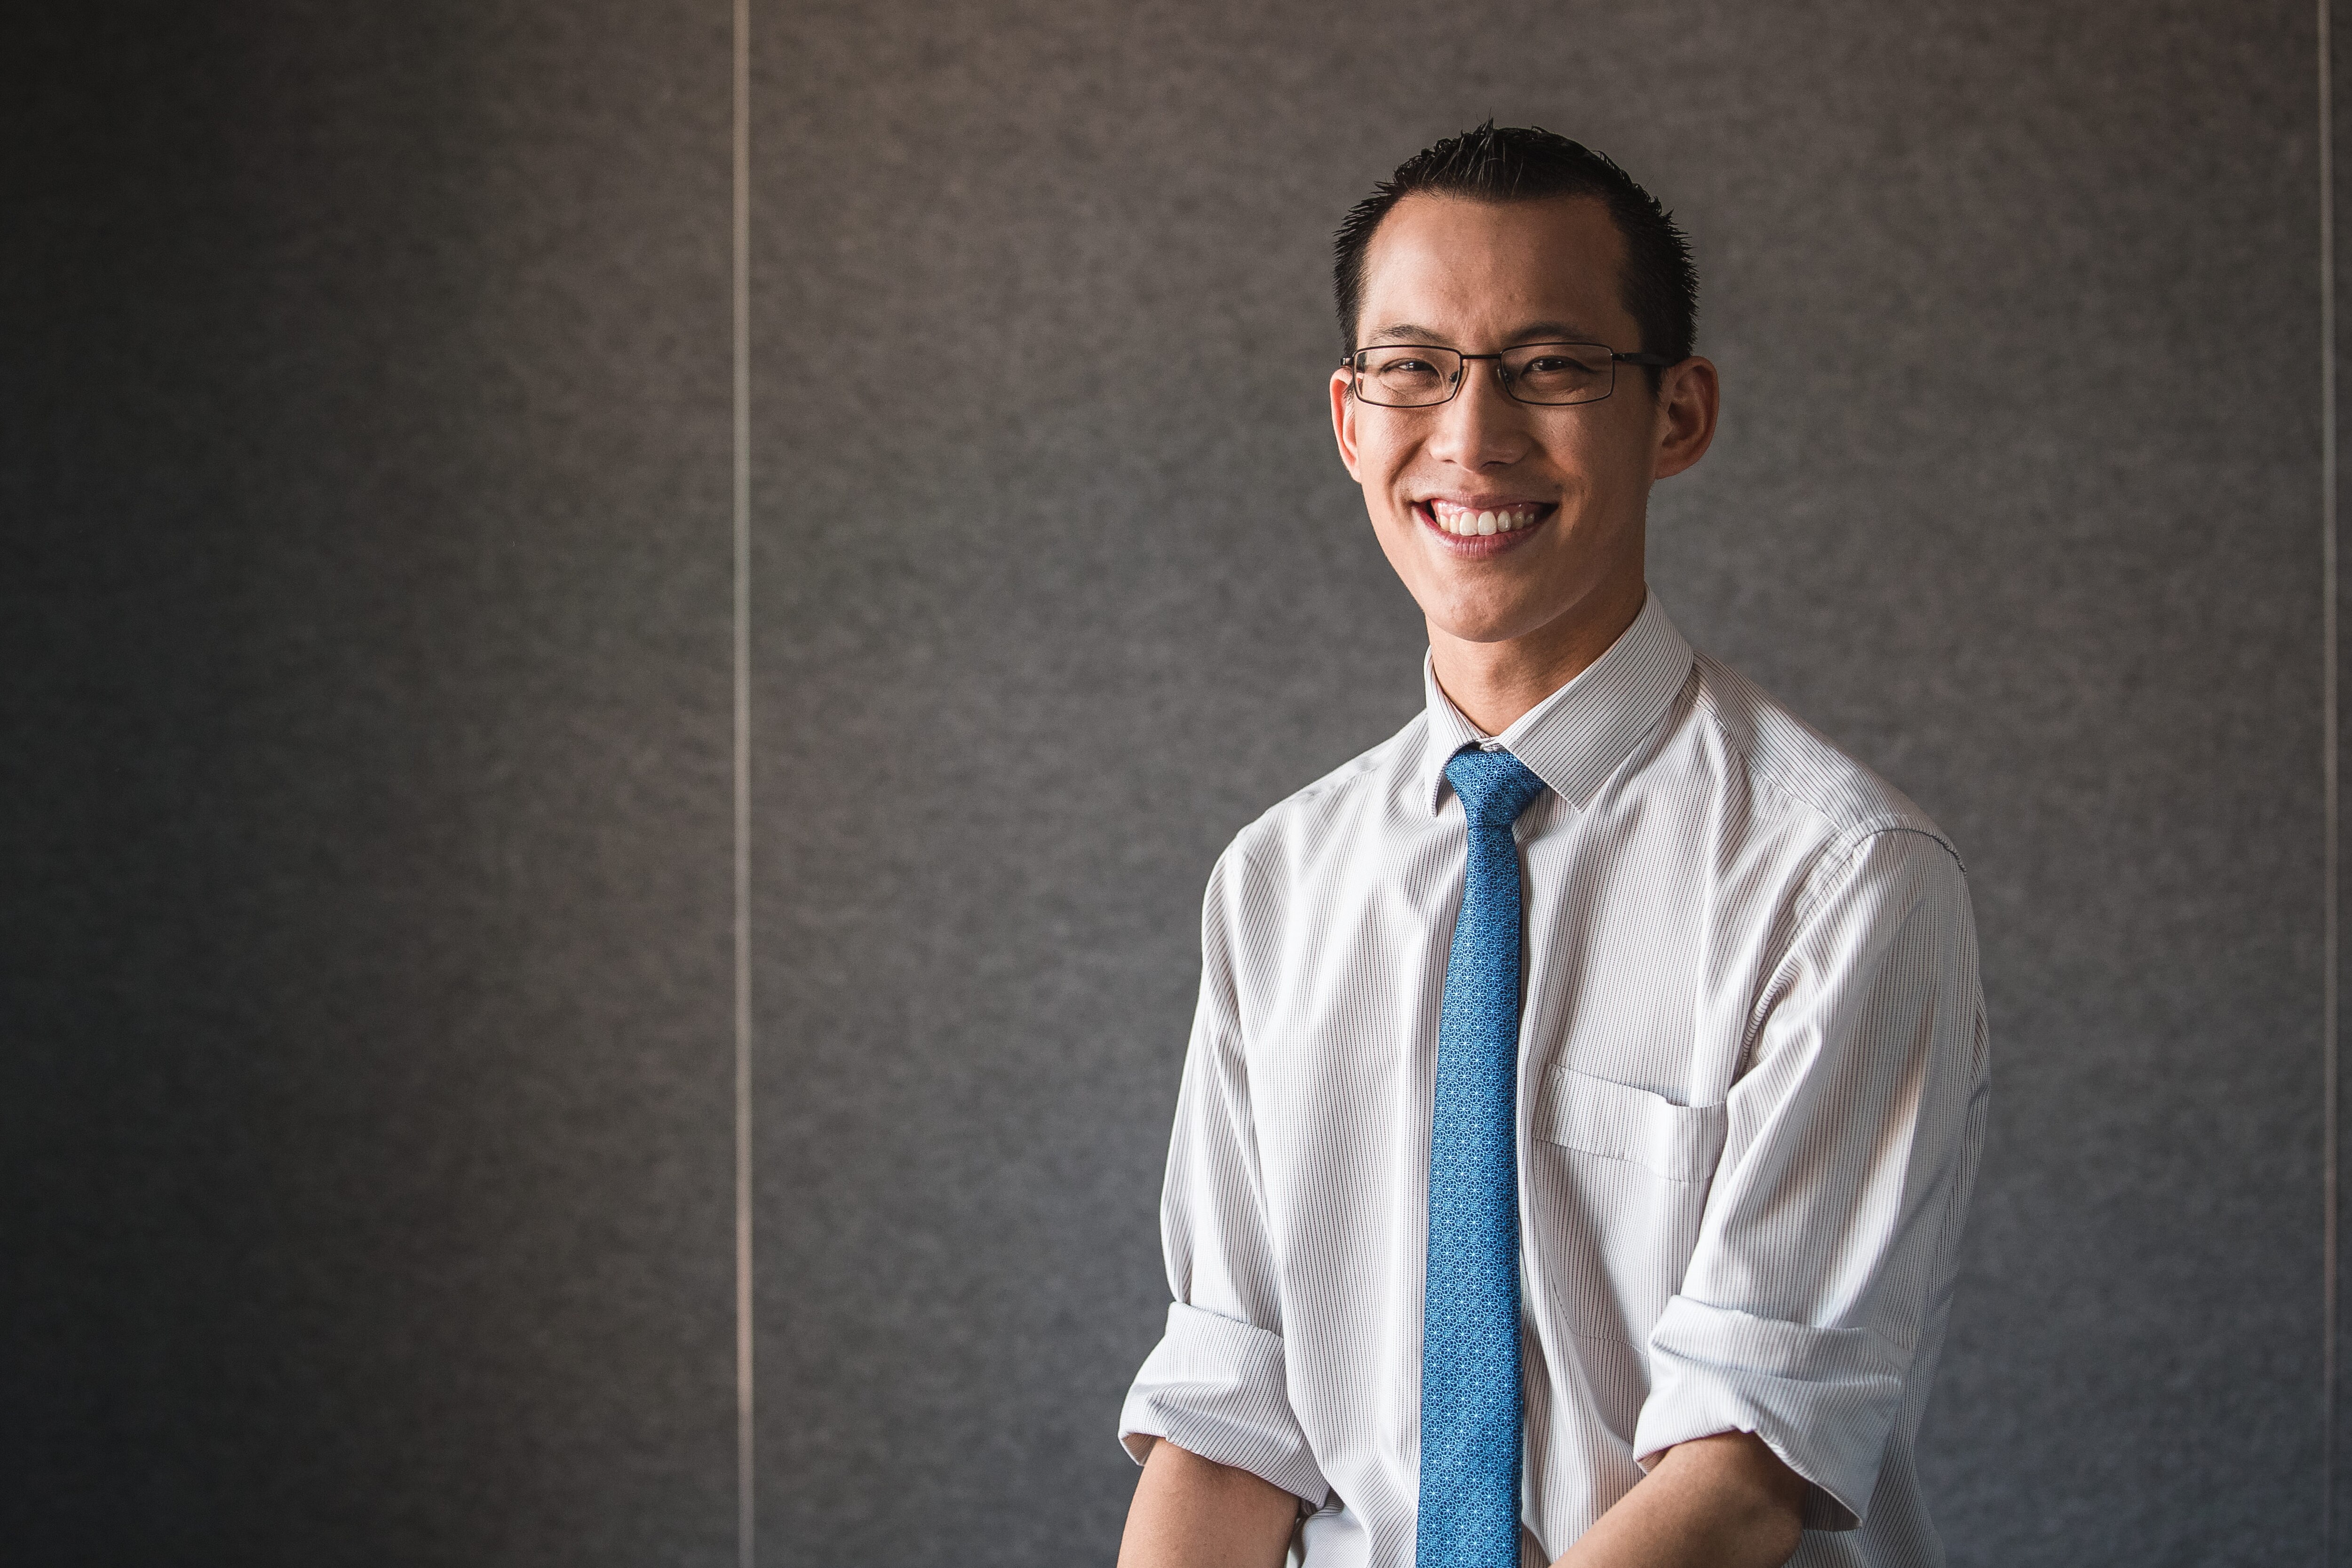 Eddie Woo has been appointed to the Australian Multicultural Council